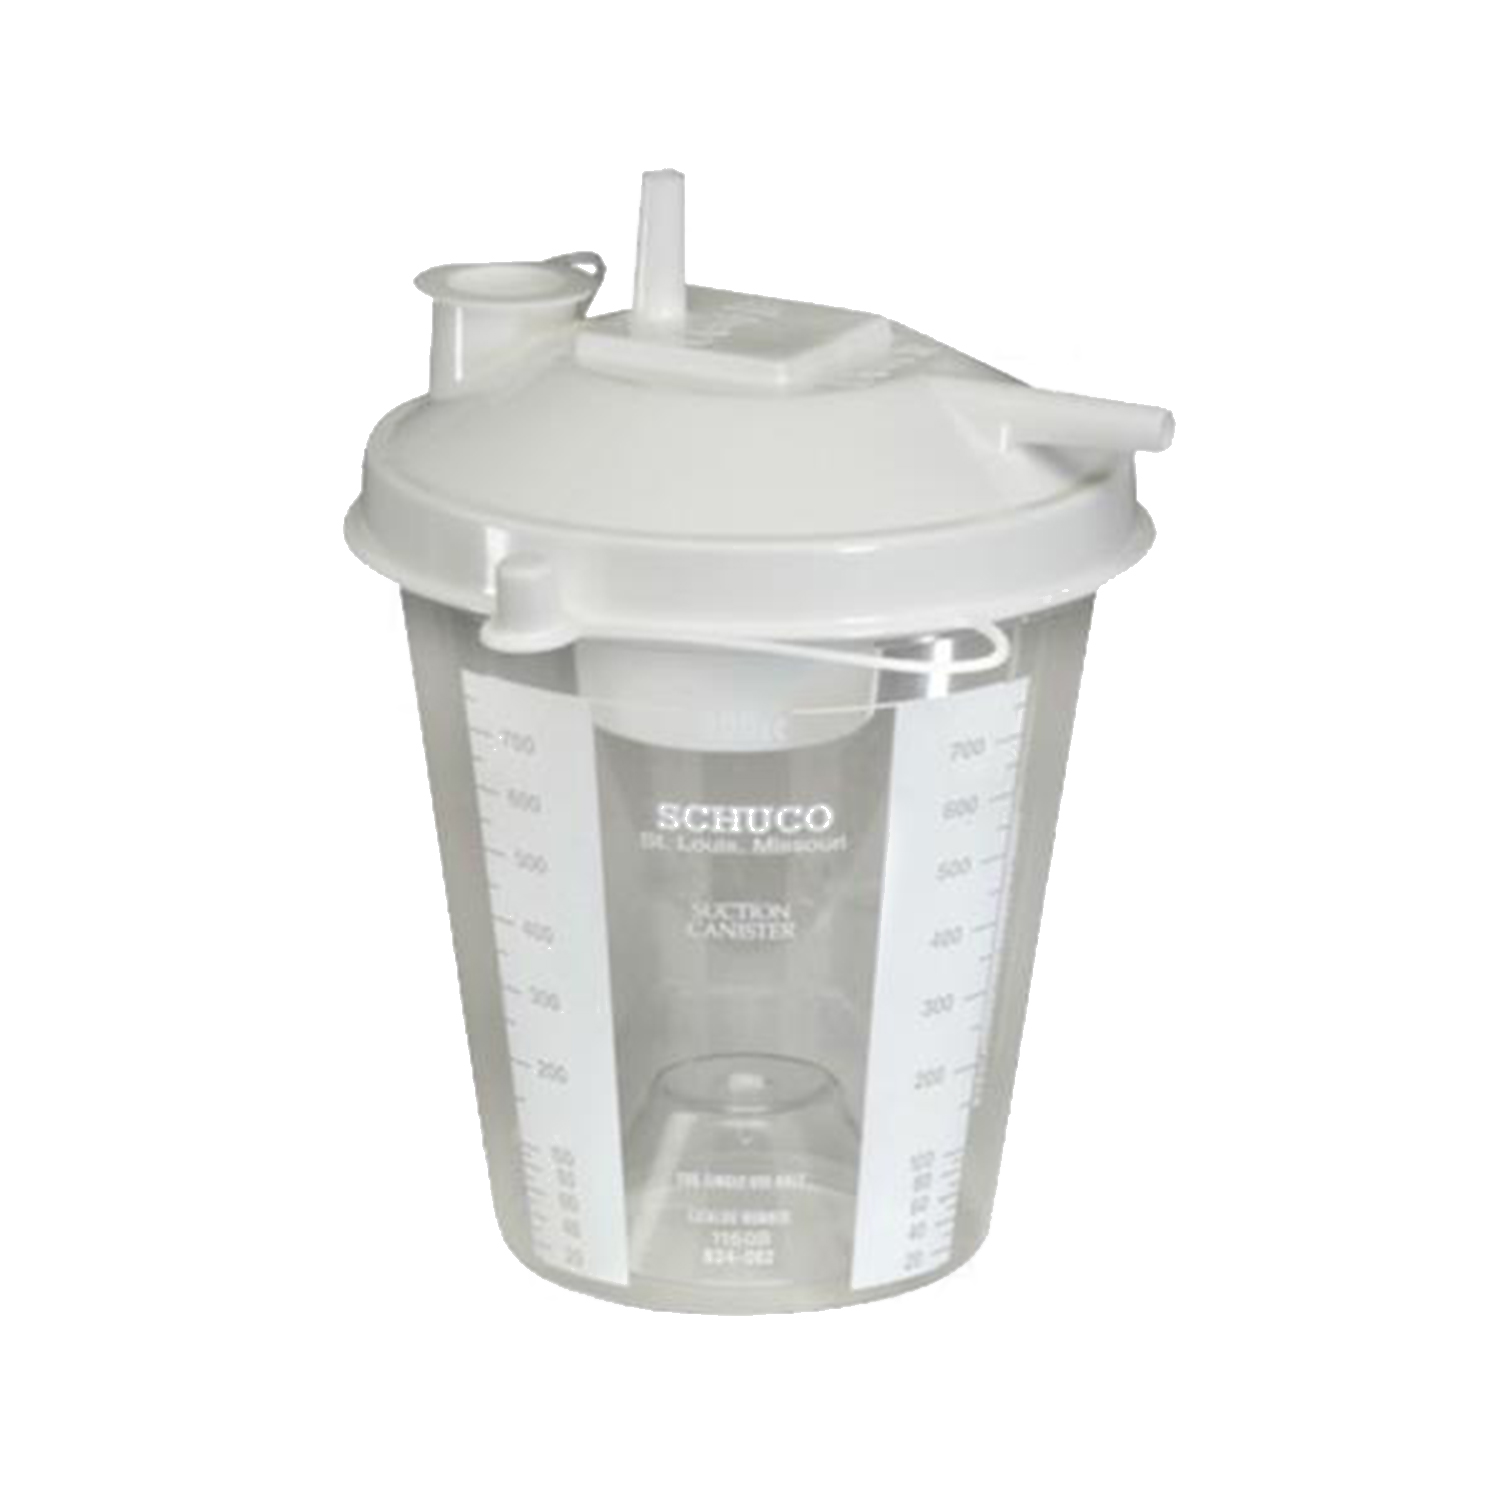 Schuco Collection Canister